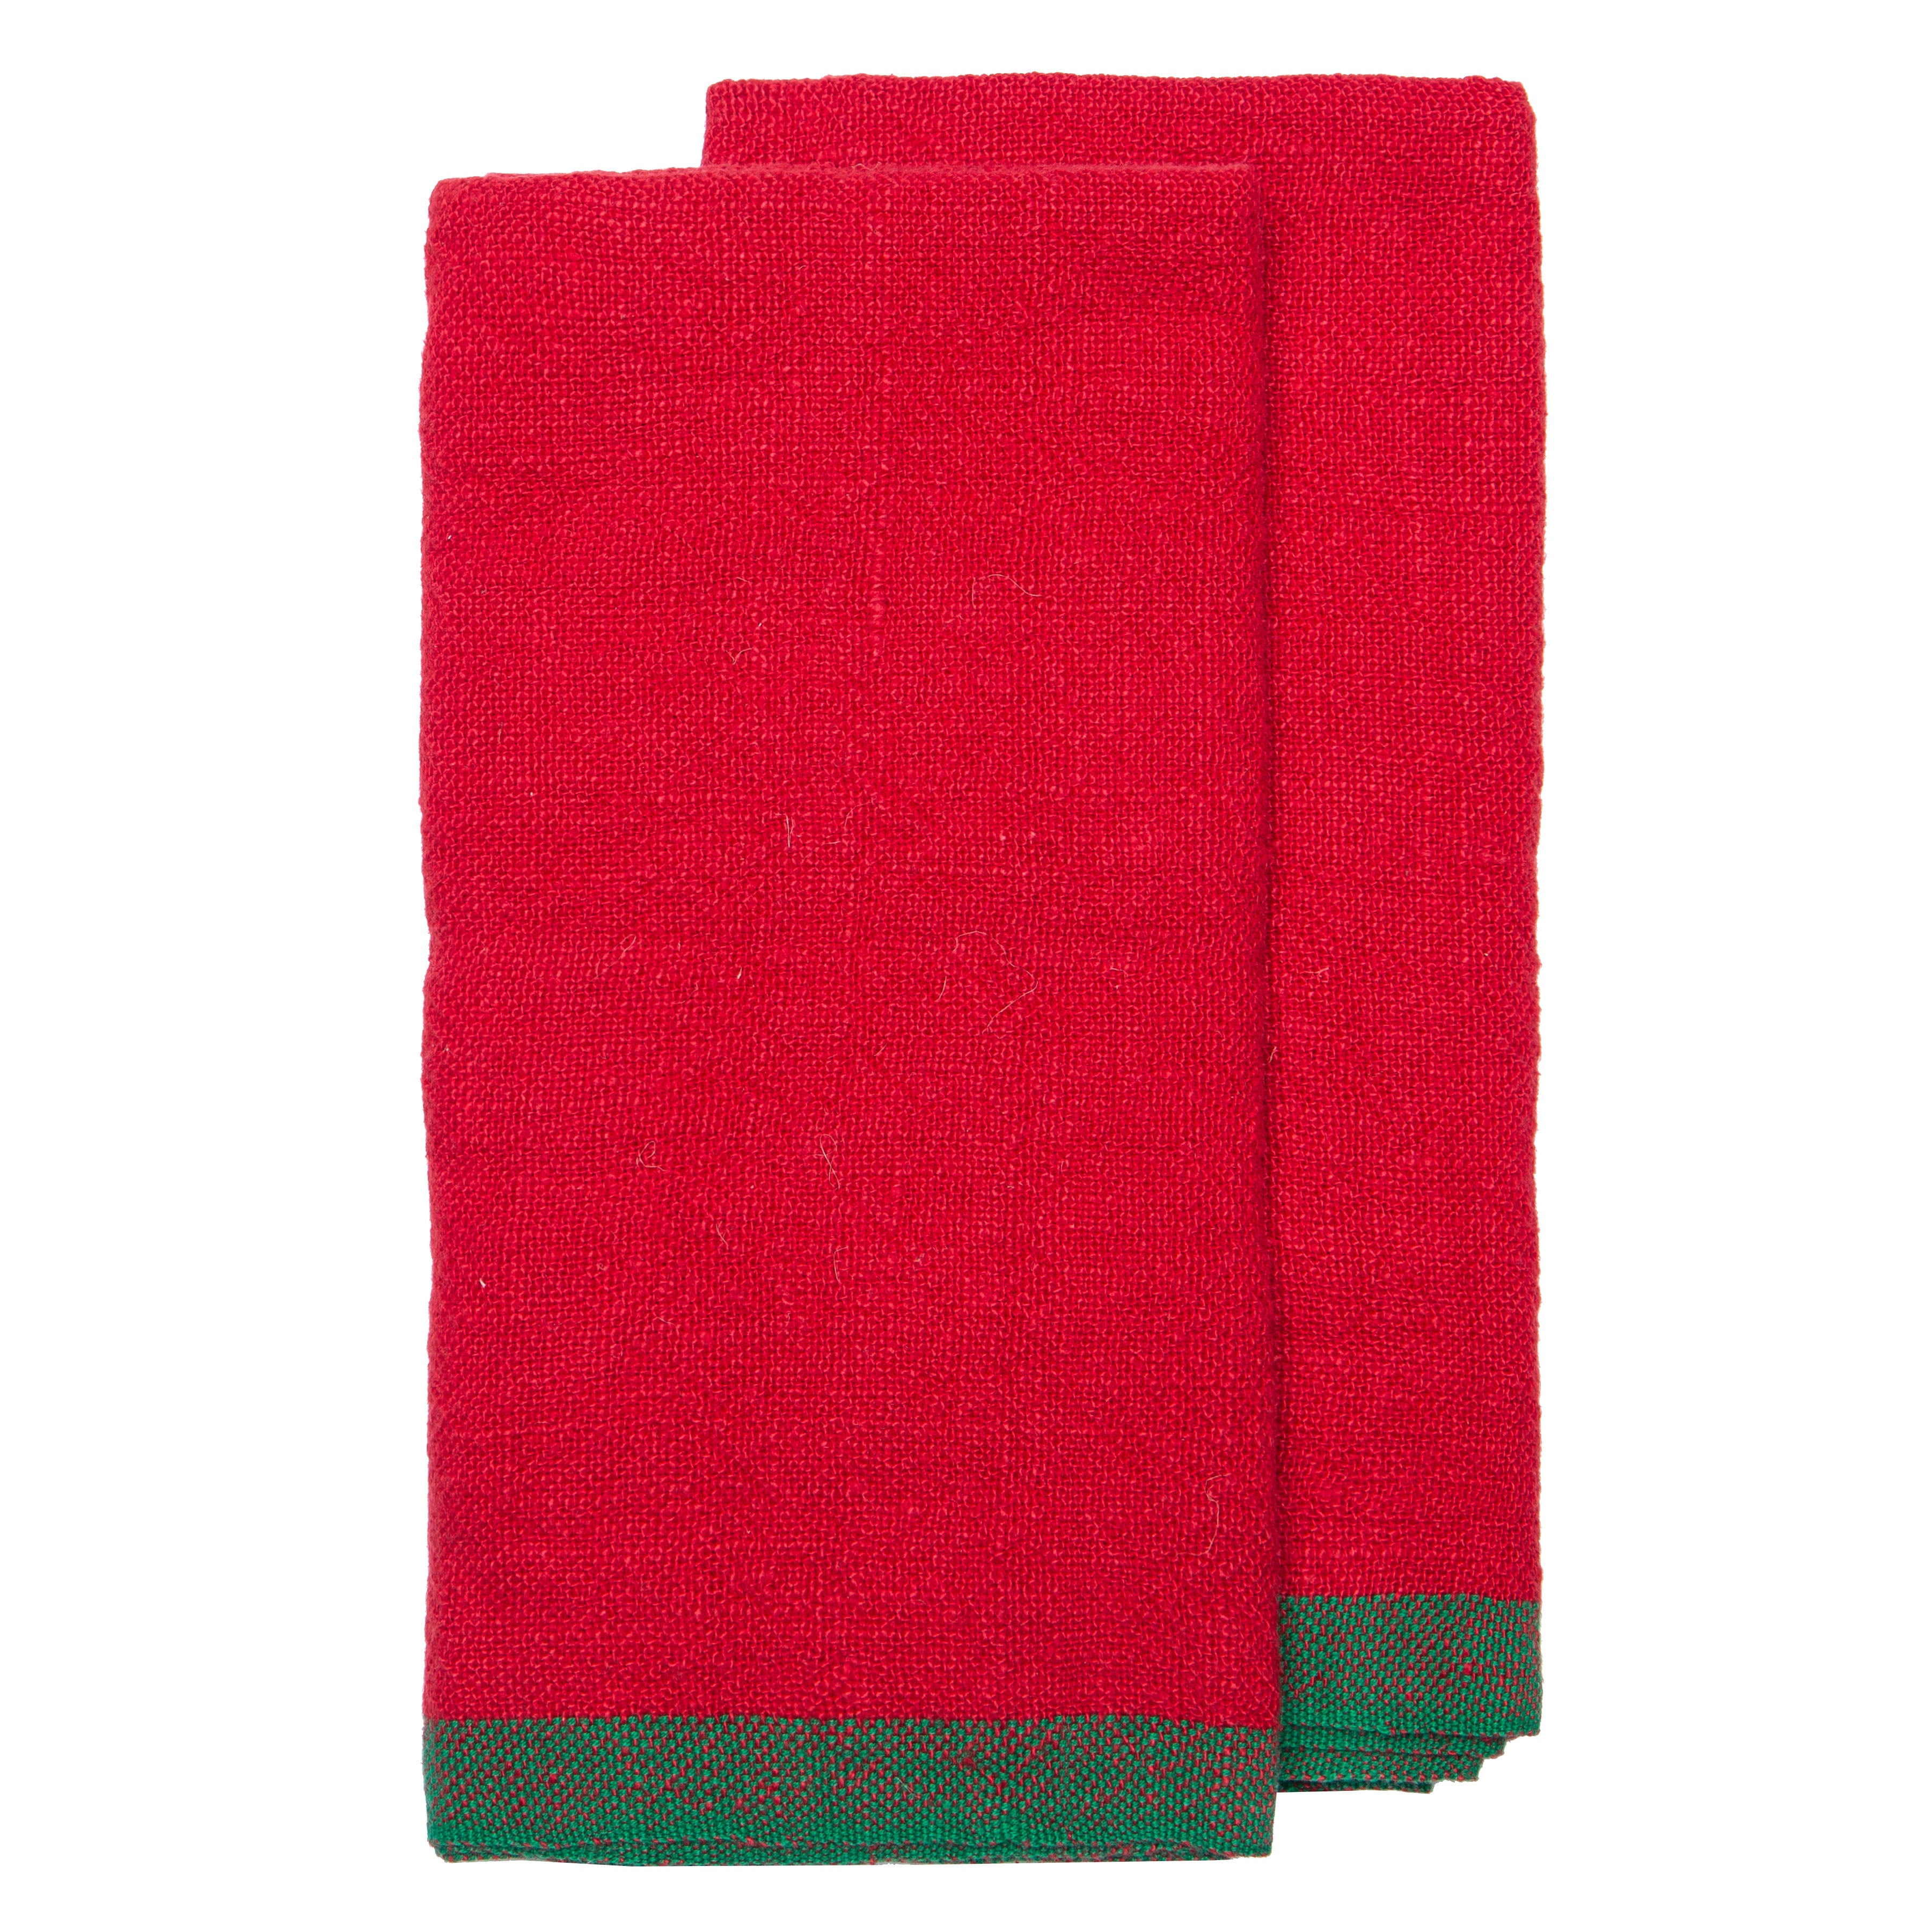 Color Block Red & Green Napkins 20x20 - Set of 4